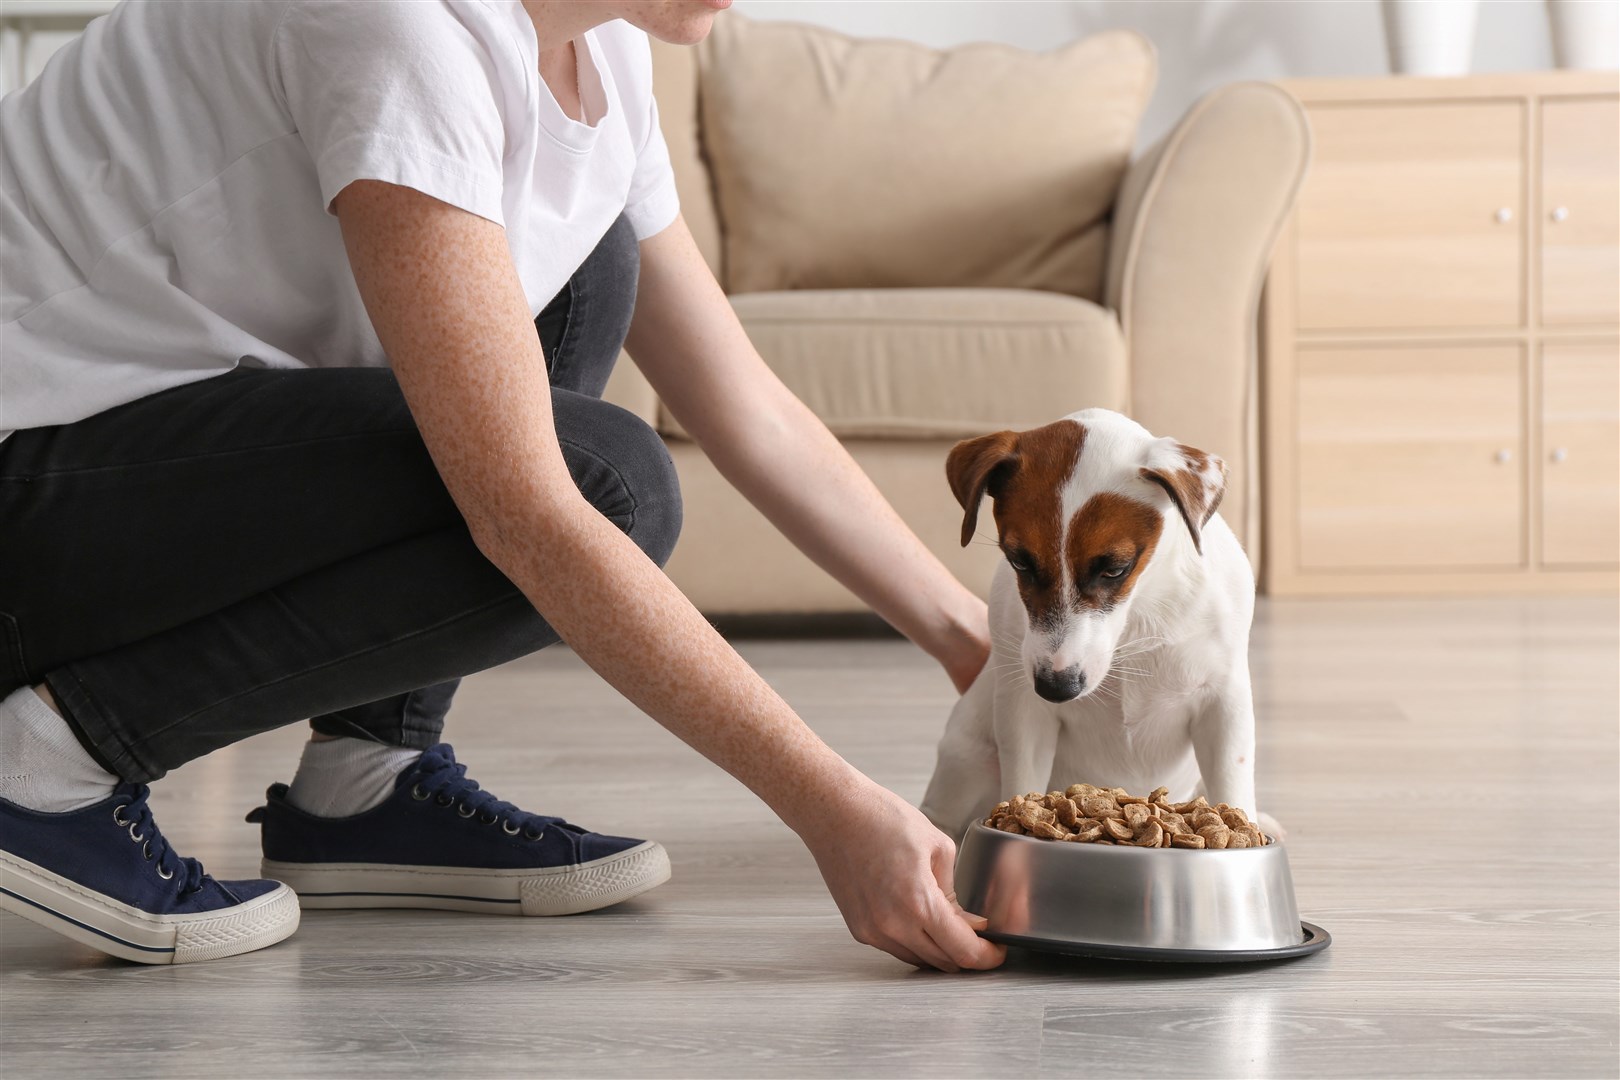 Diet can be an issue though the causes of the disease are still poorly understood. There are ways though to treat the condition for cats and dogs.